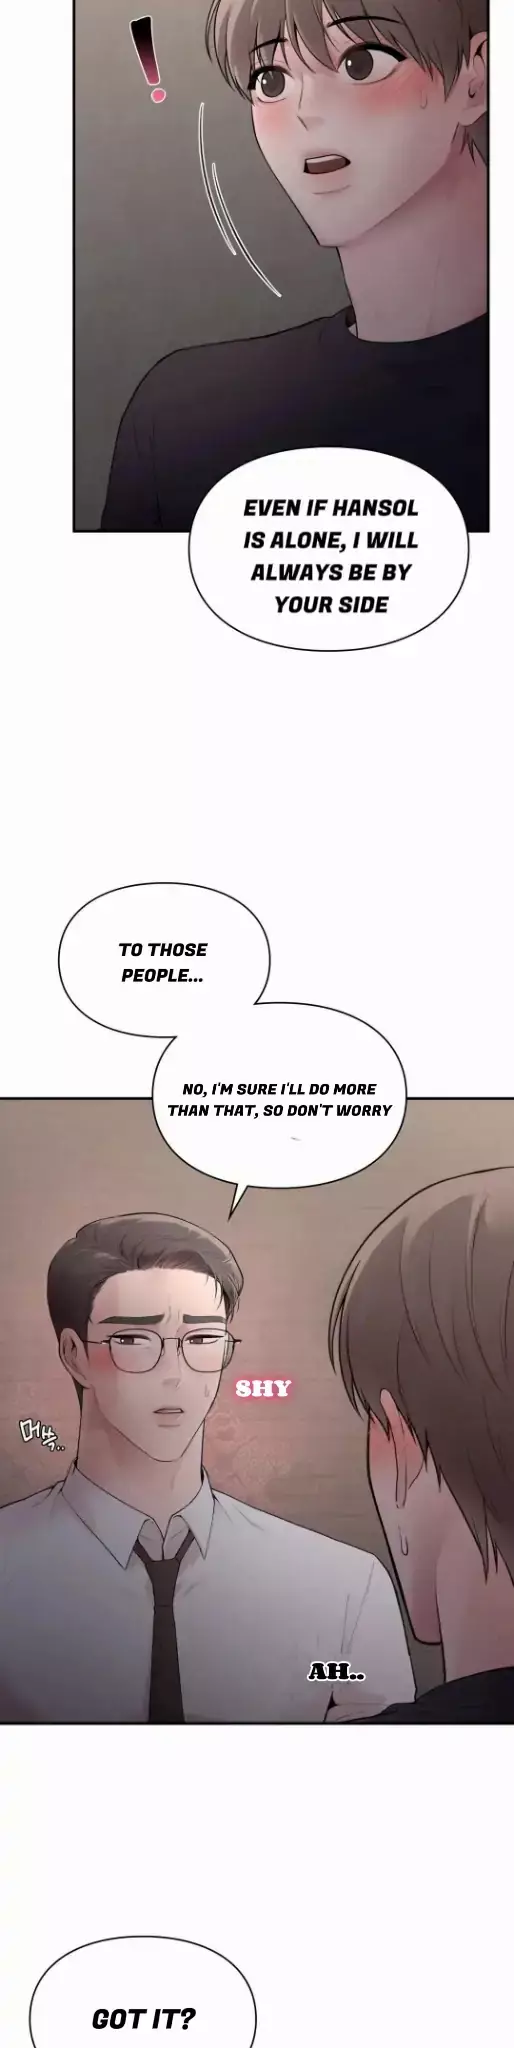 Ideal Type But Kkondae - 5 page 13-8858b8d6